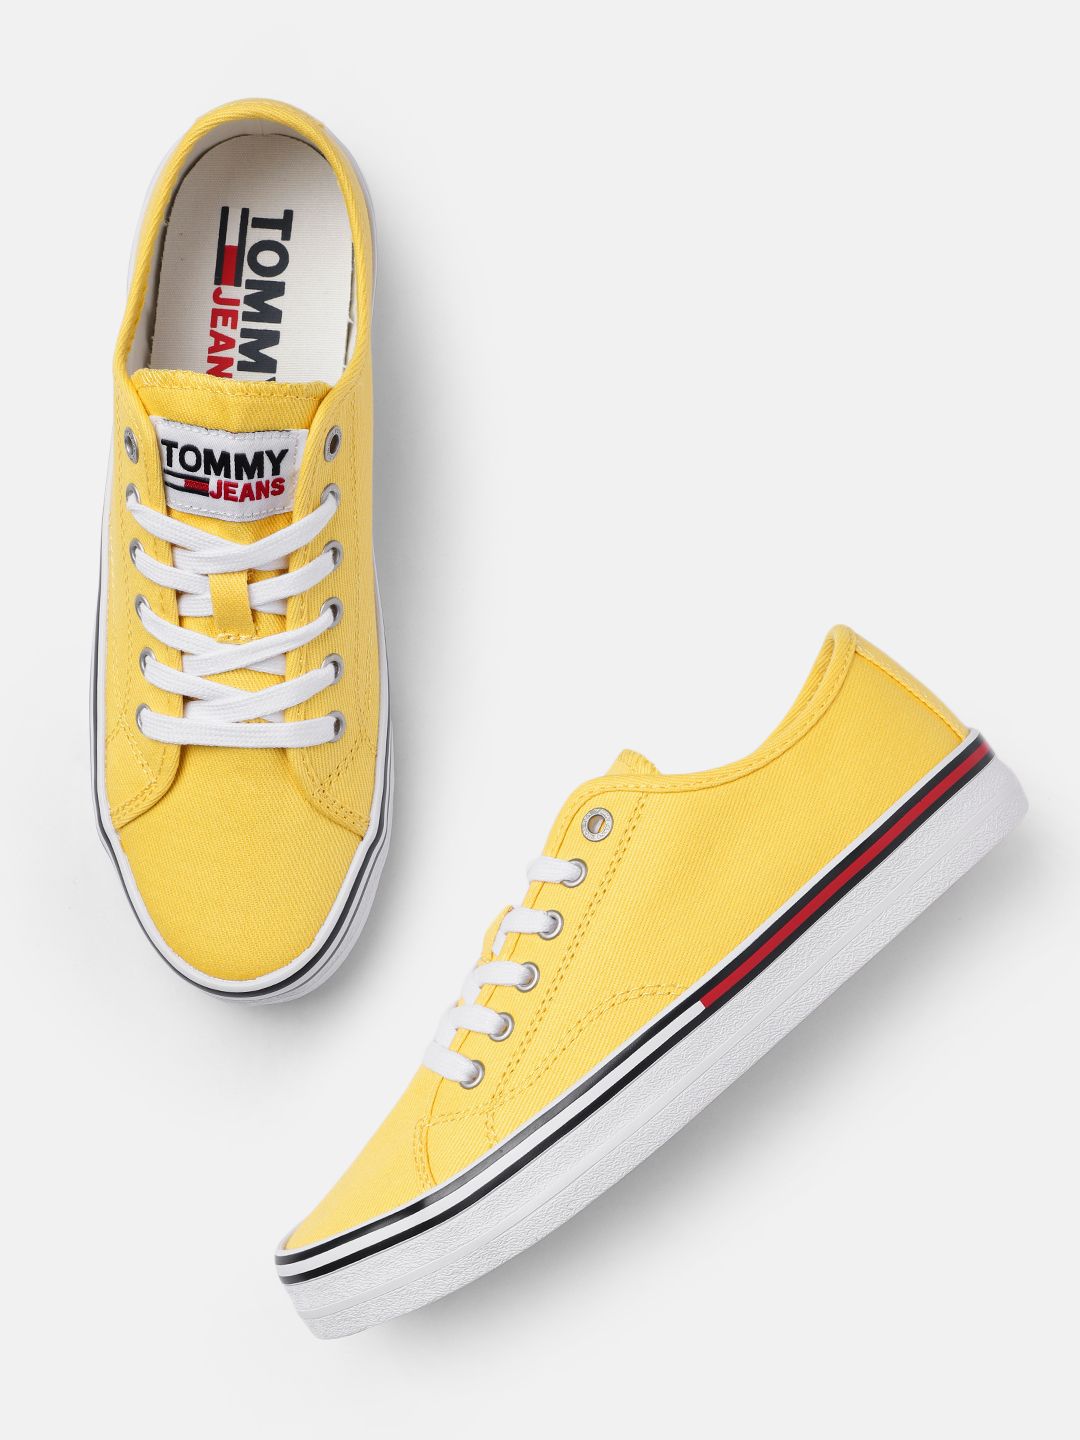 Tommy Hilfiger Women Yellow Sneakers Price in India